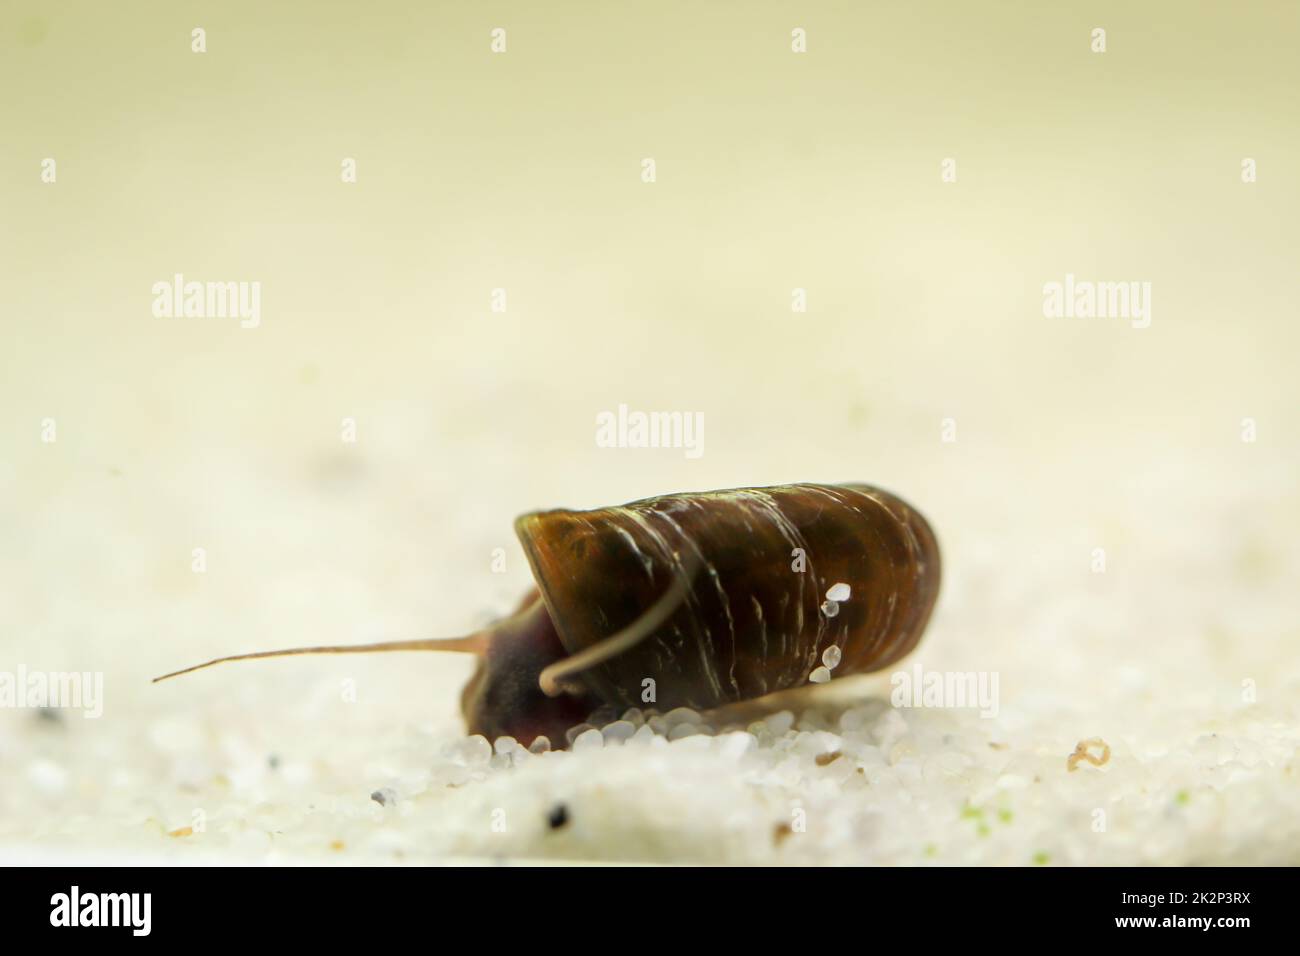 A post horn snail in the aquarium. Its shell is shaped like a post horn. Stock Photo